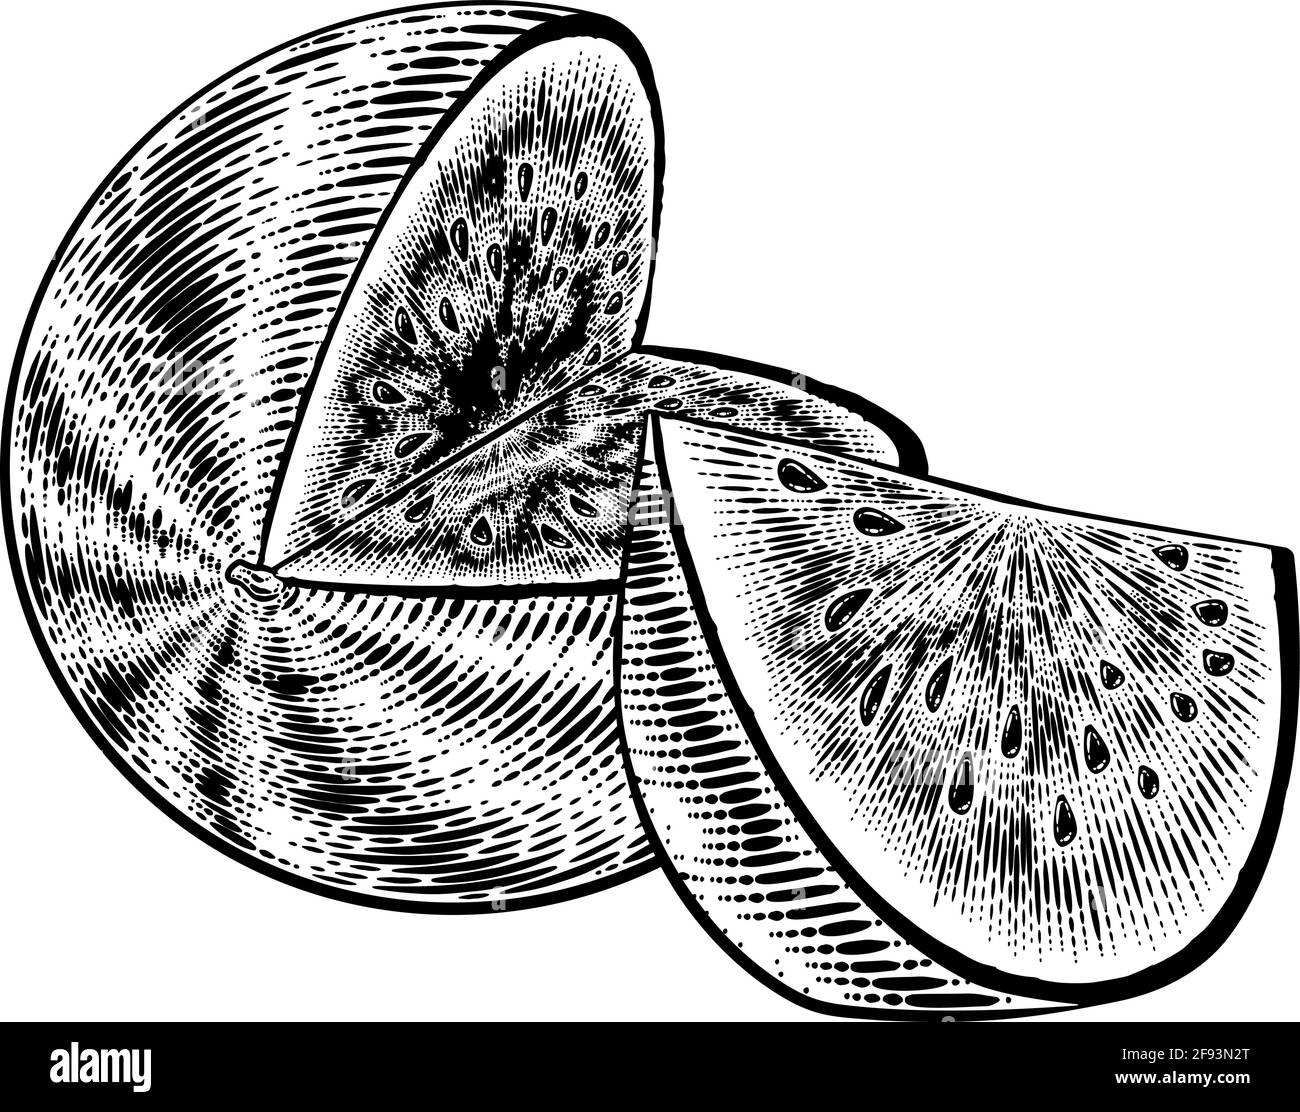 Watermelon Vintage Woodcut Engraved Style Drawing Stock Vector